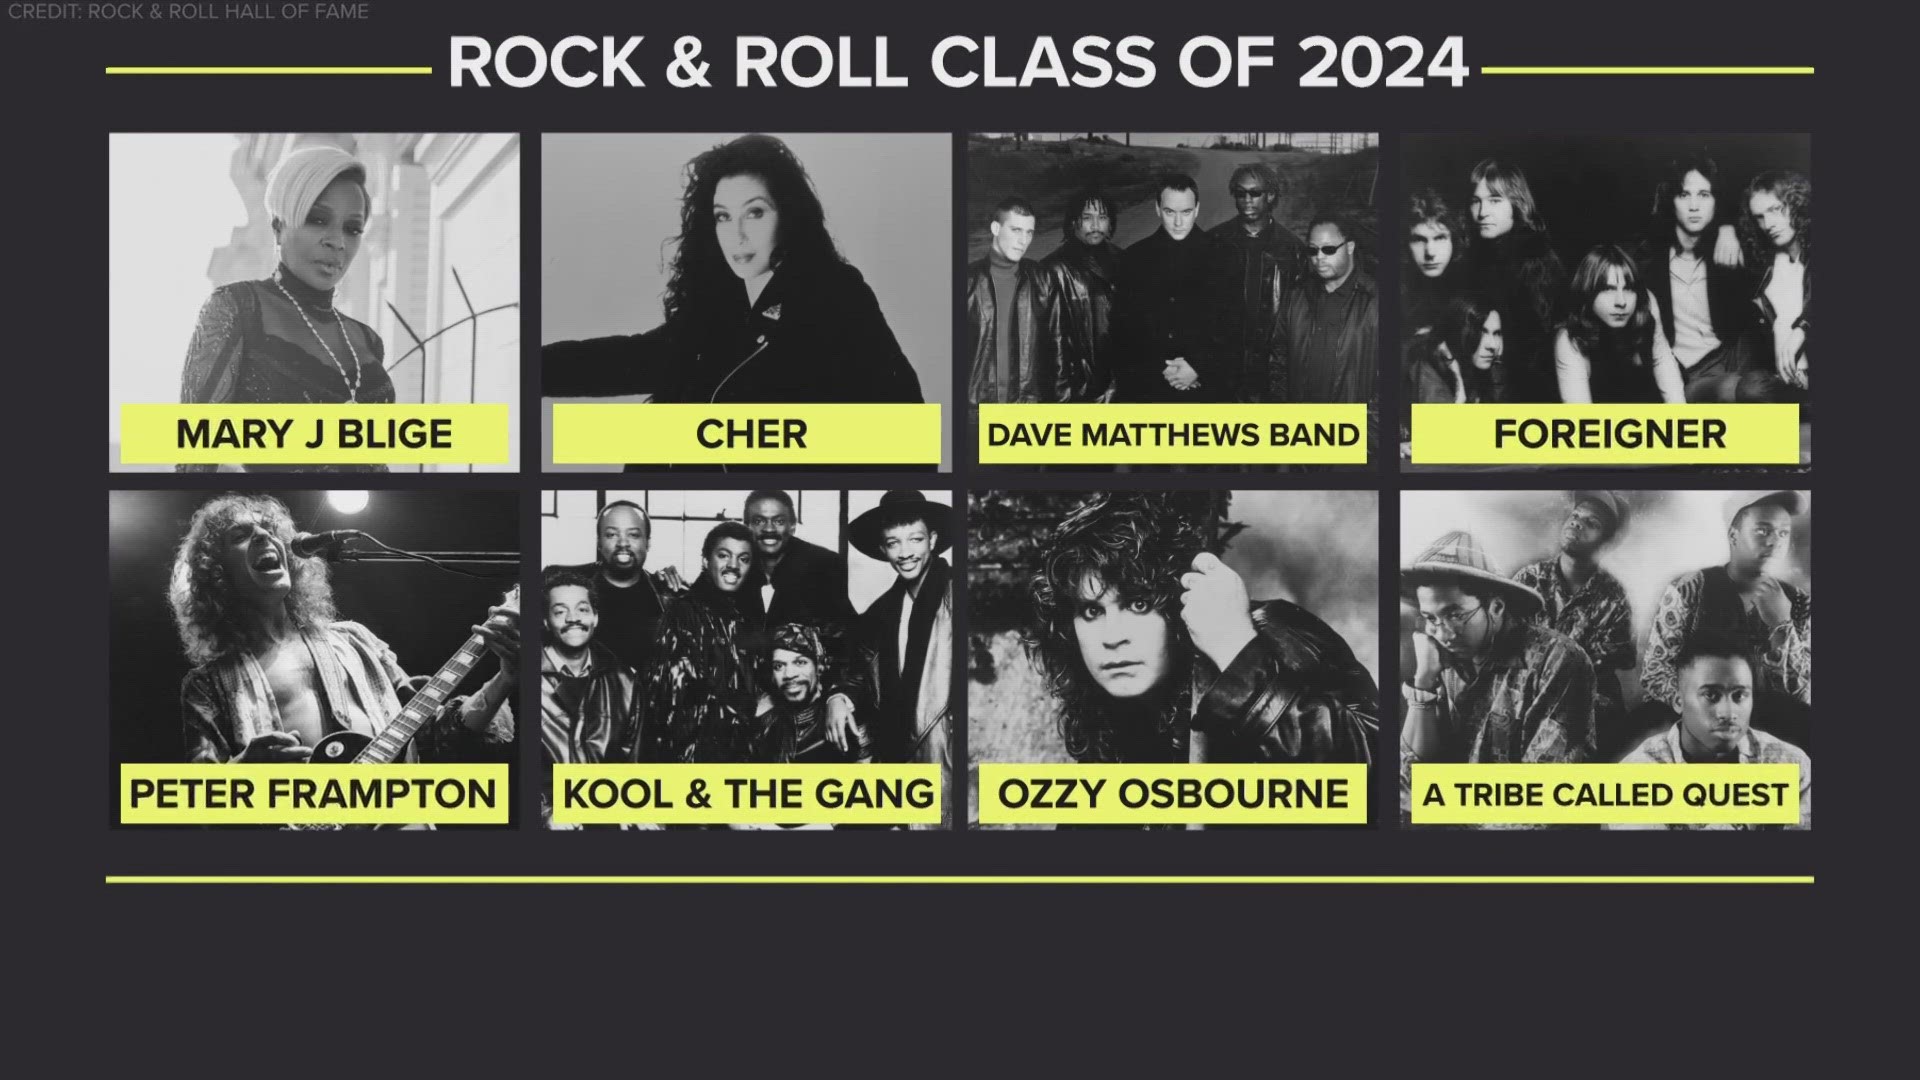 The Rock and Roll Hall of Fame has released this year's list of inductees.